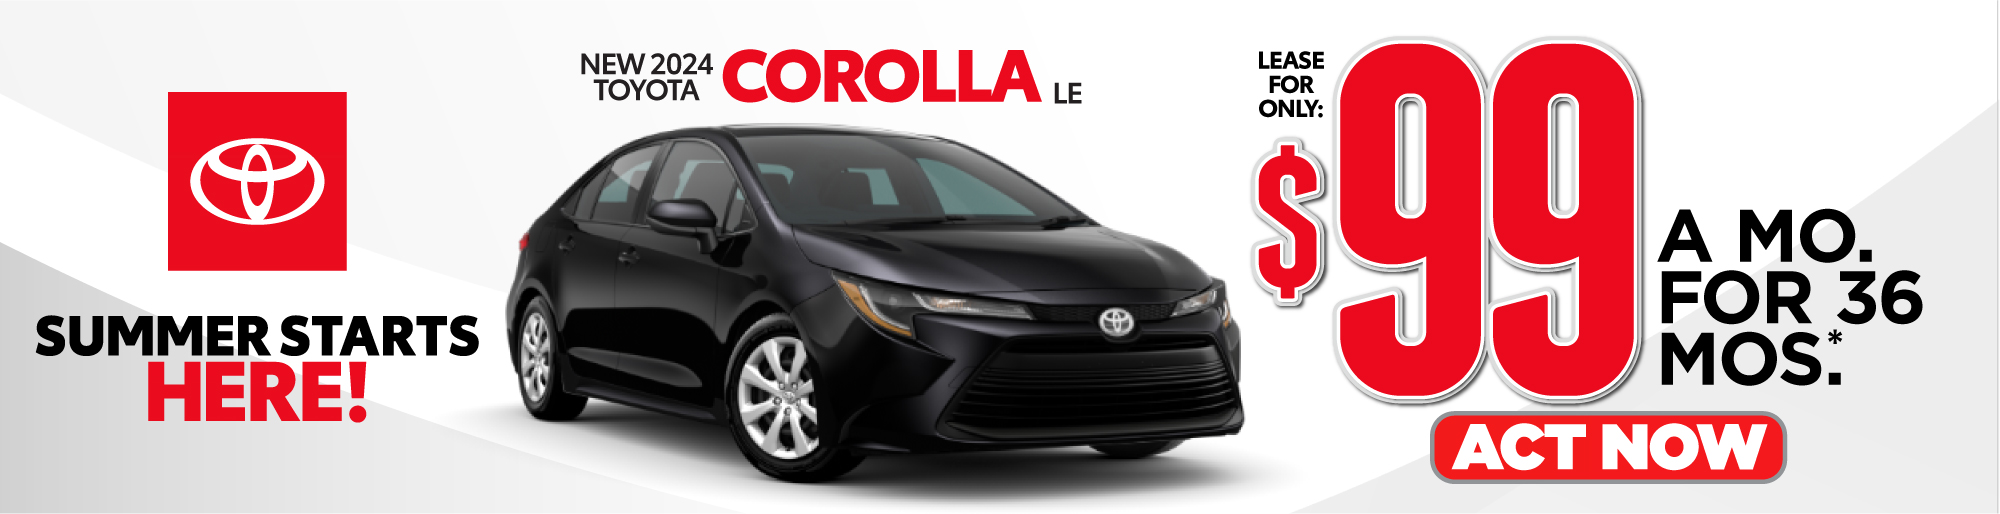 New 2022 Toyota Corolla LE Lease for only $99/mo.* ACT NOW